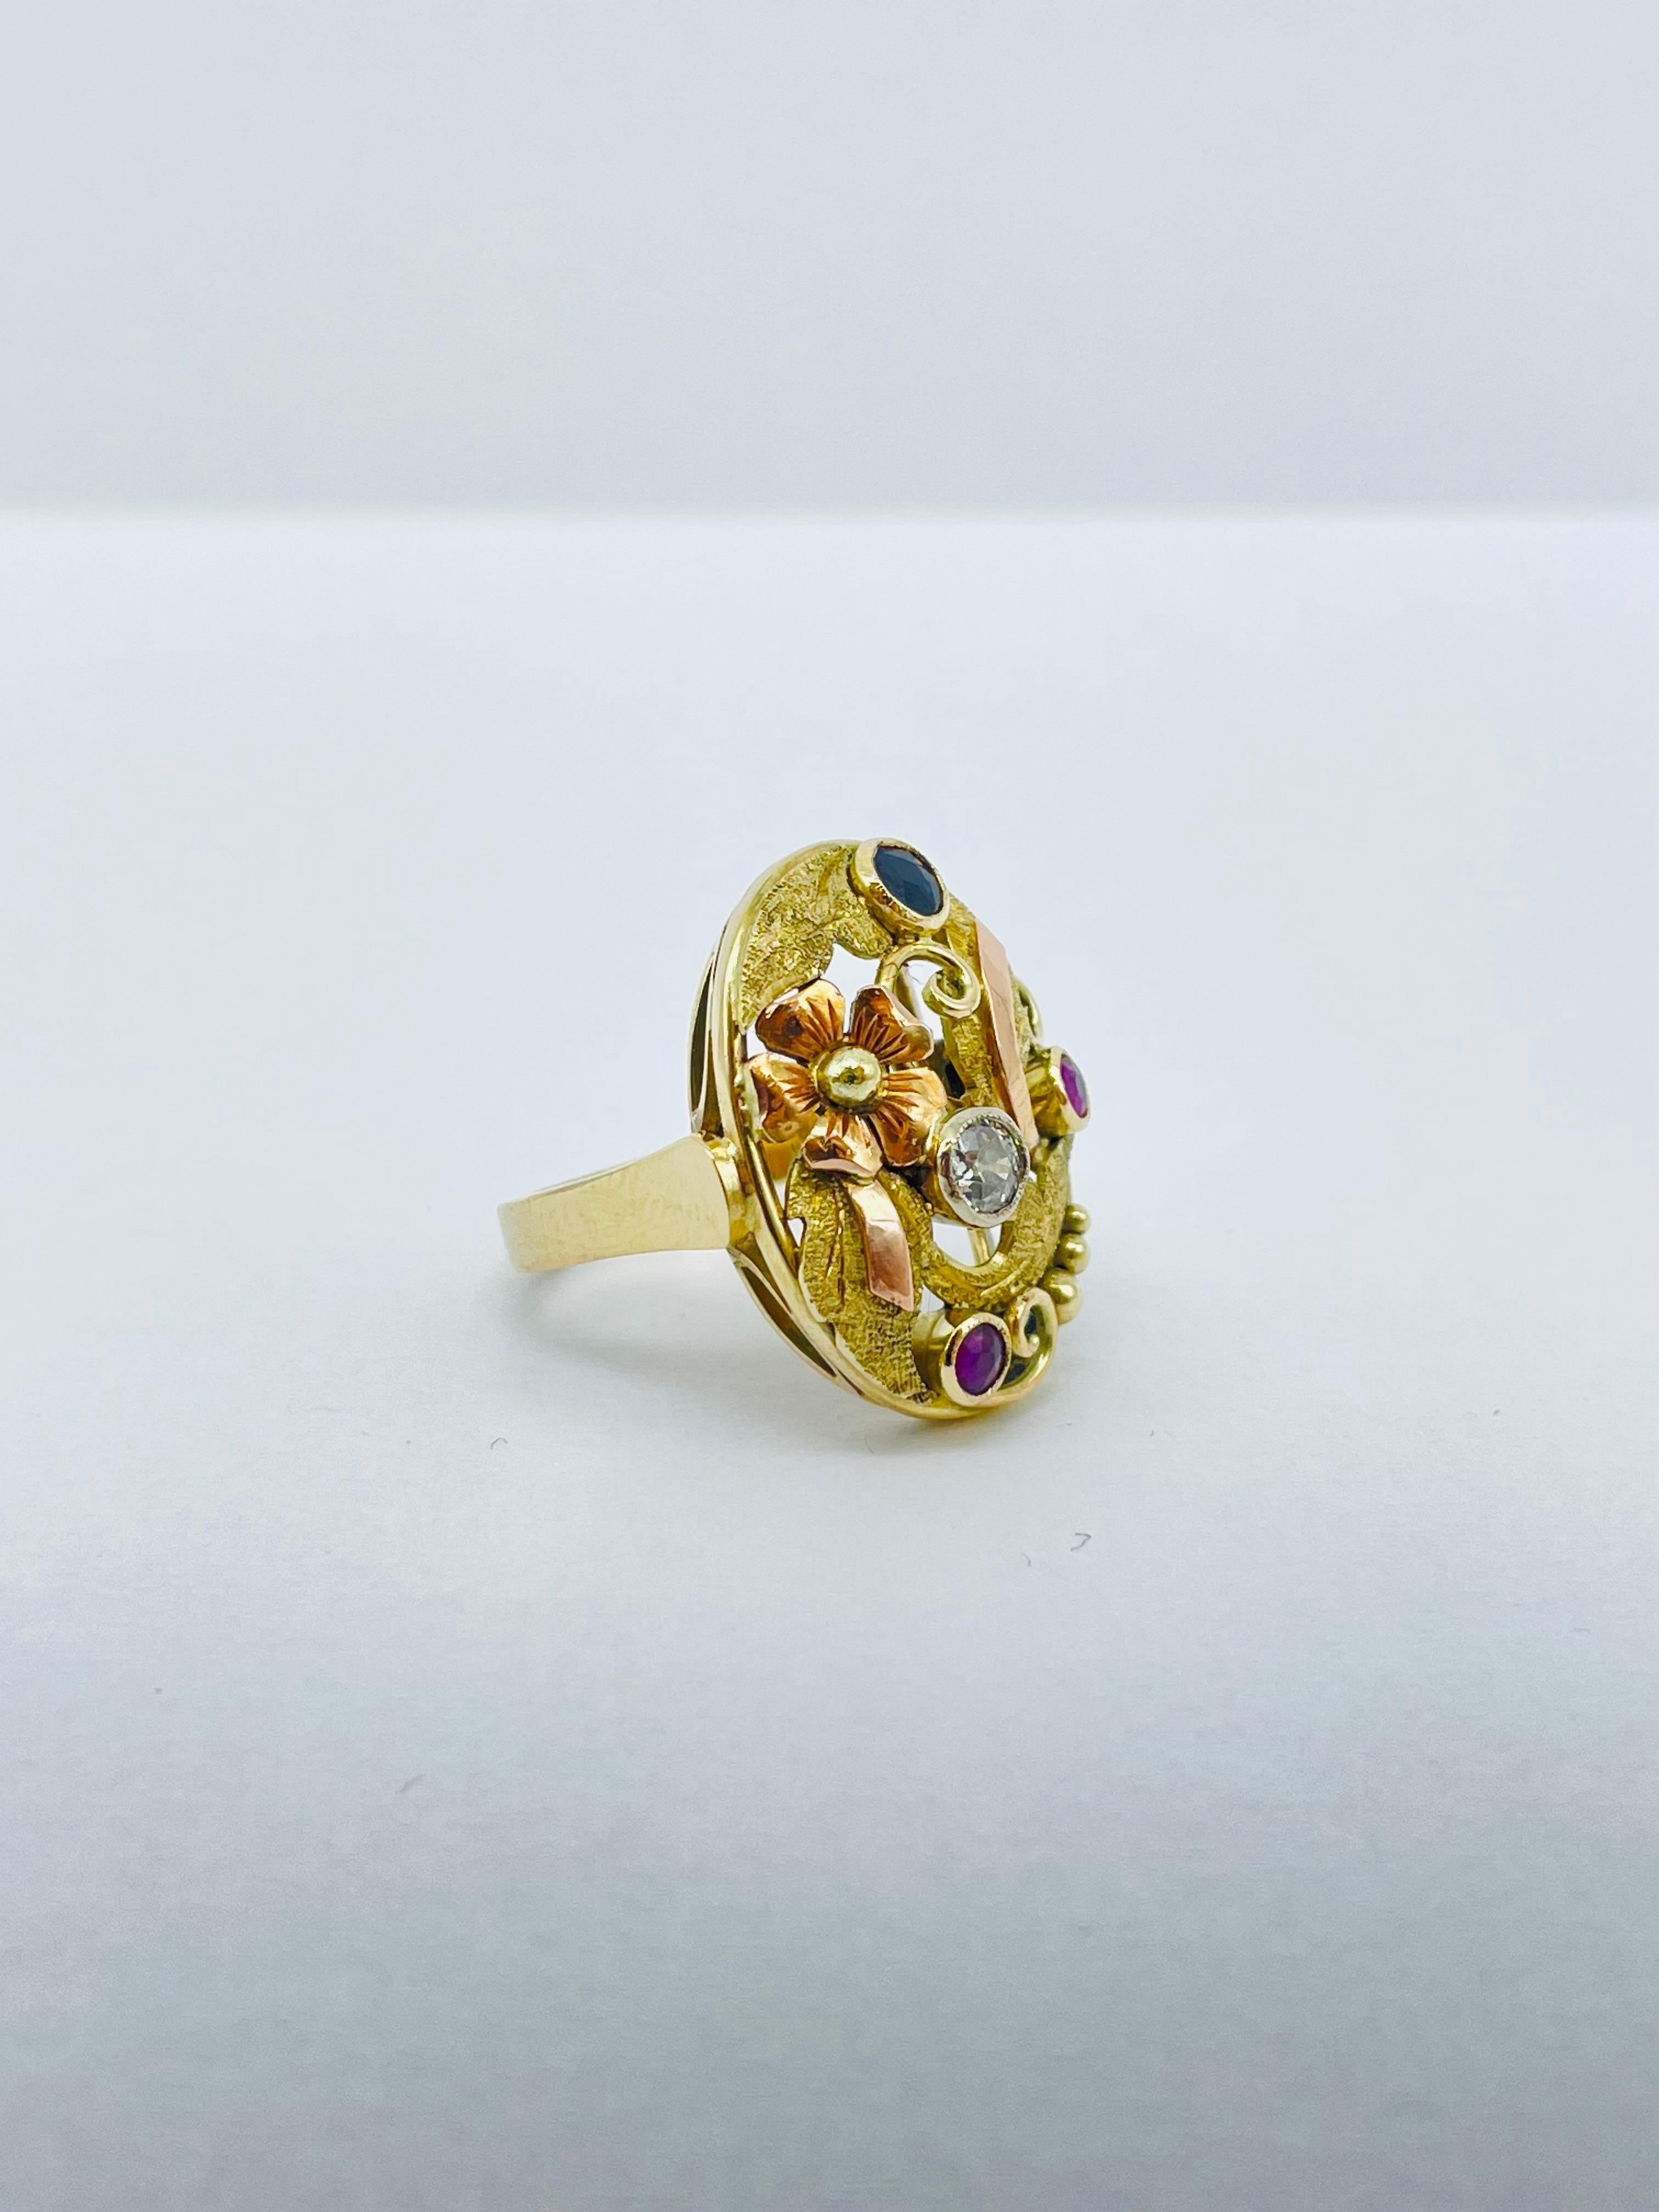 This noble cocktail ring is truly a work of art. Crafted with intricate detail and skill, it features a luxurious combination of yellow and red gold in the setting. At its center sits a stunning 0.2 ct old-cut diamond, which catches the light